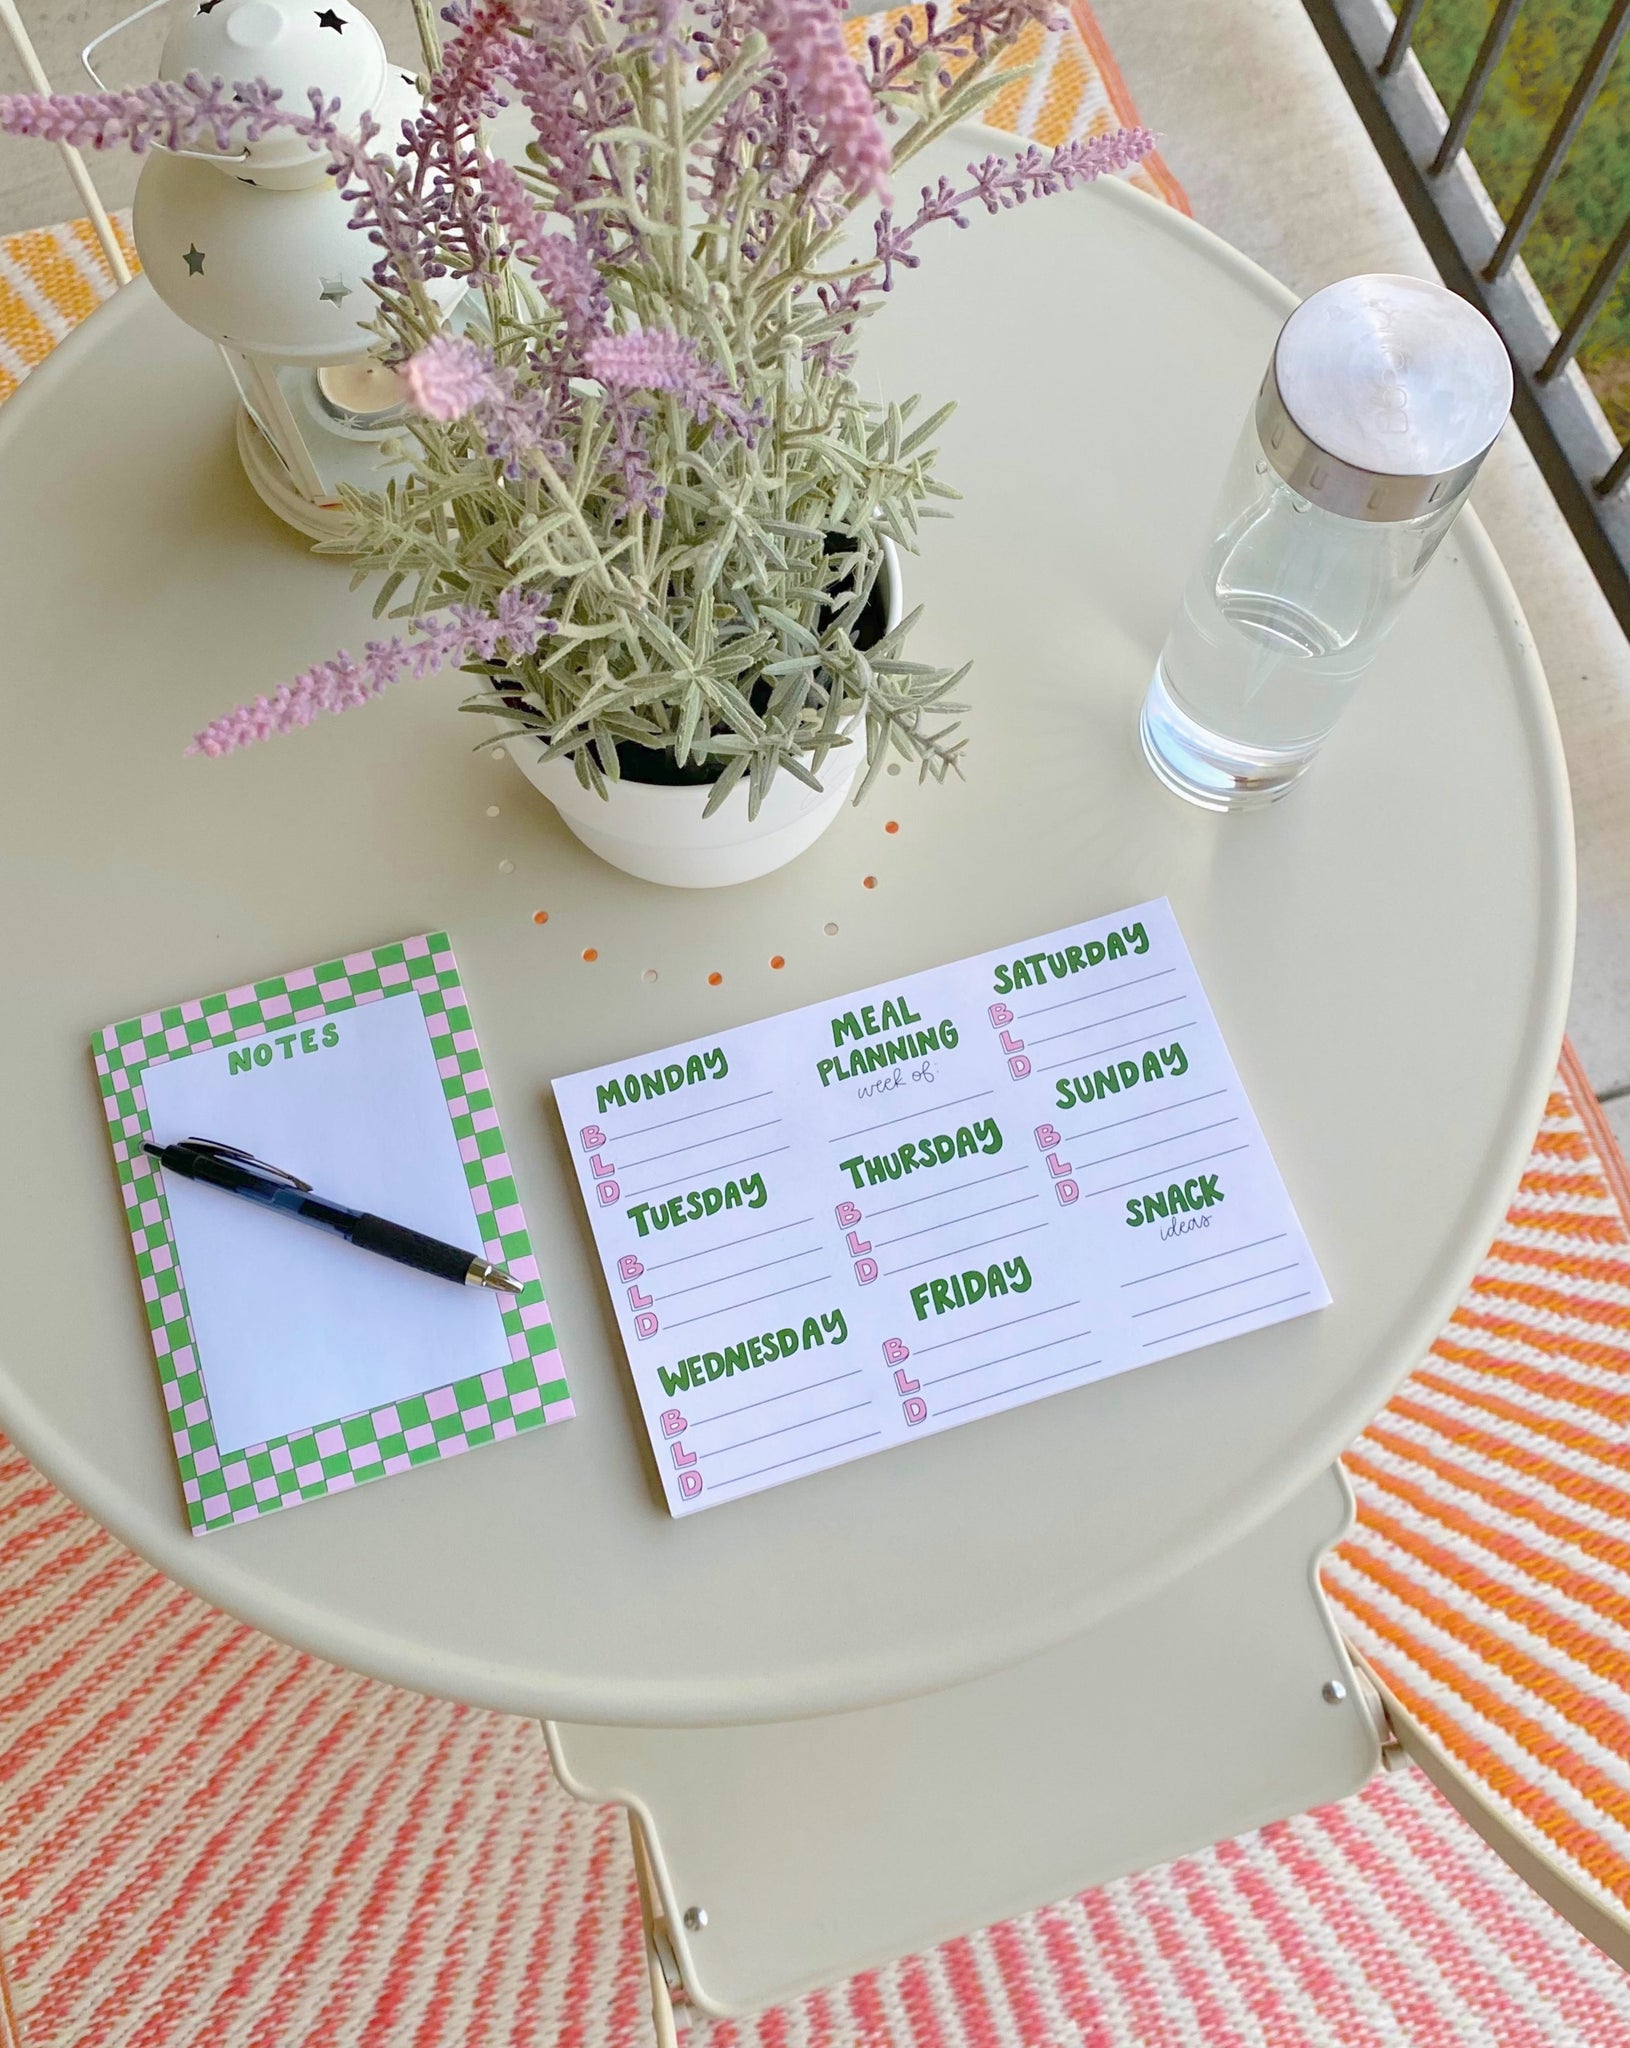 MEAL PLANNING NOTEPAD